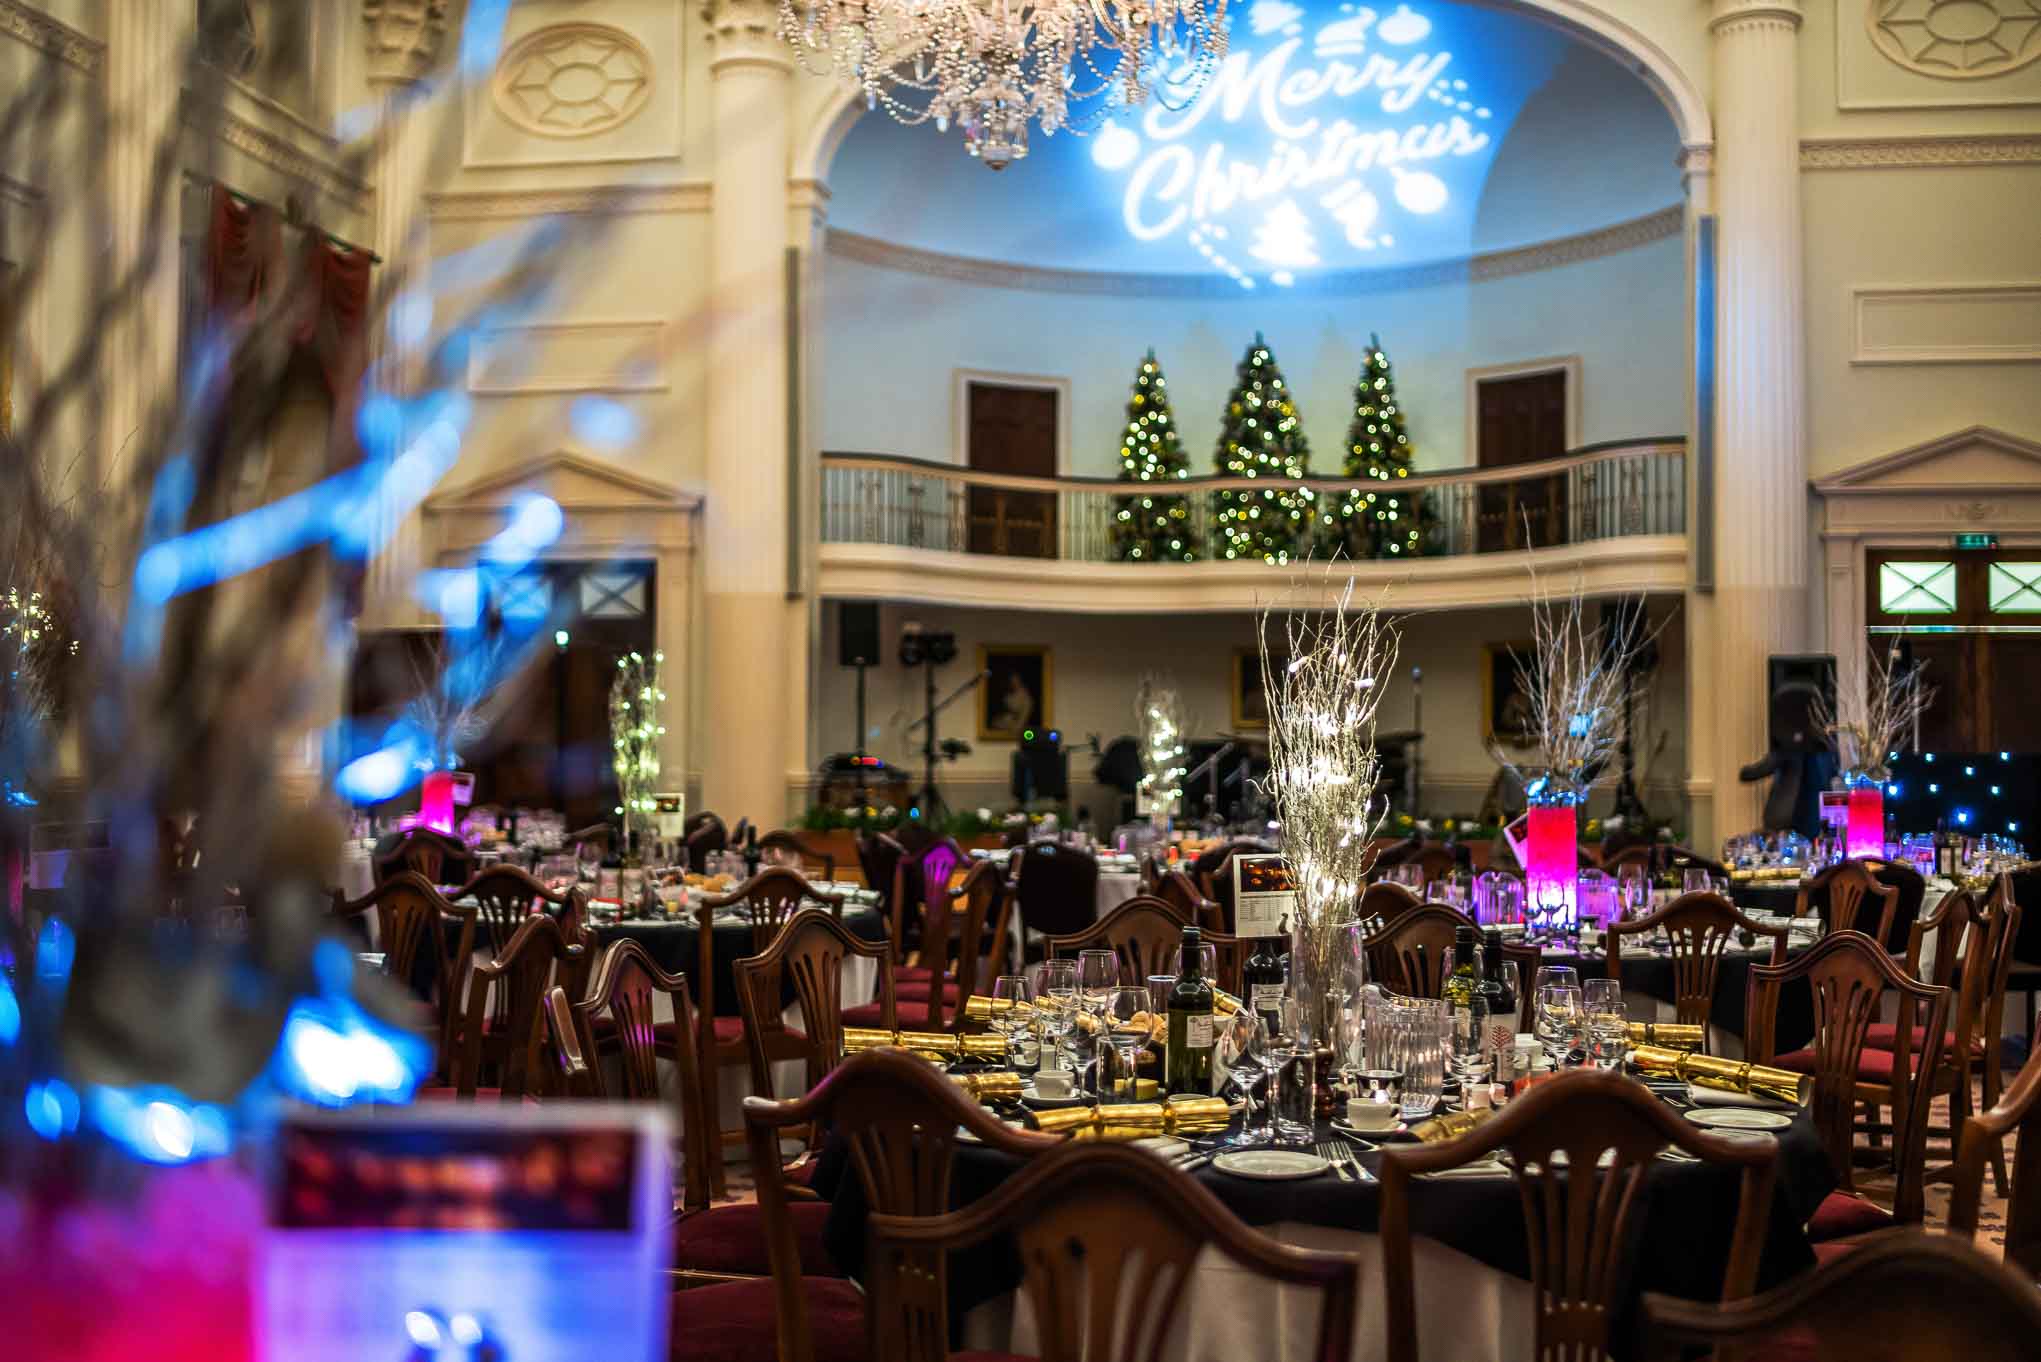 The Pump Room, festively decorated and ready for guests to arrive